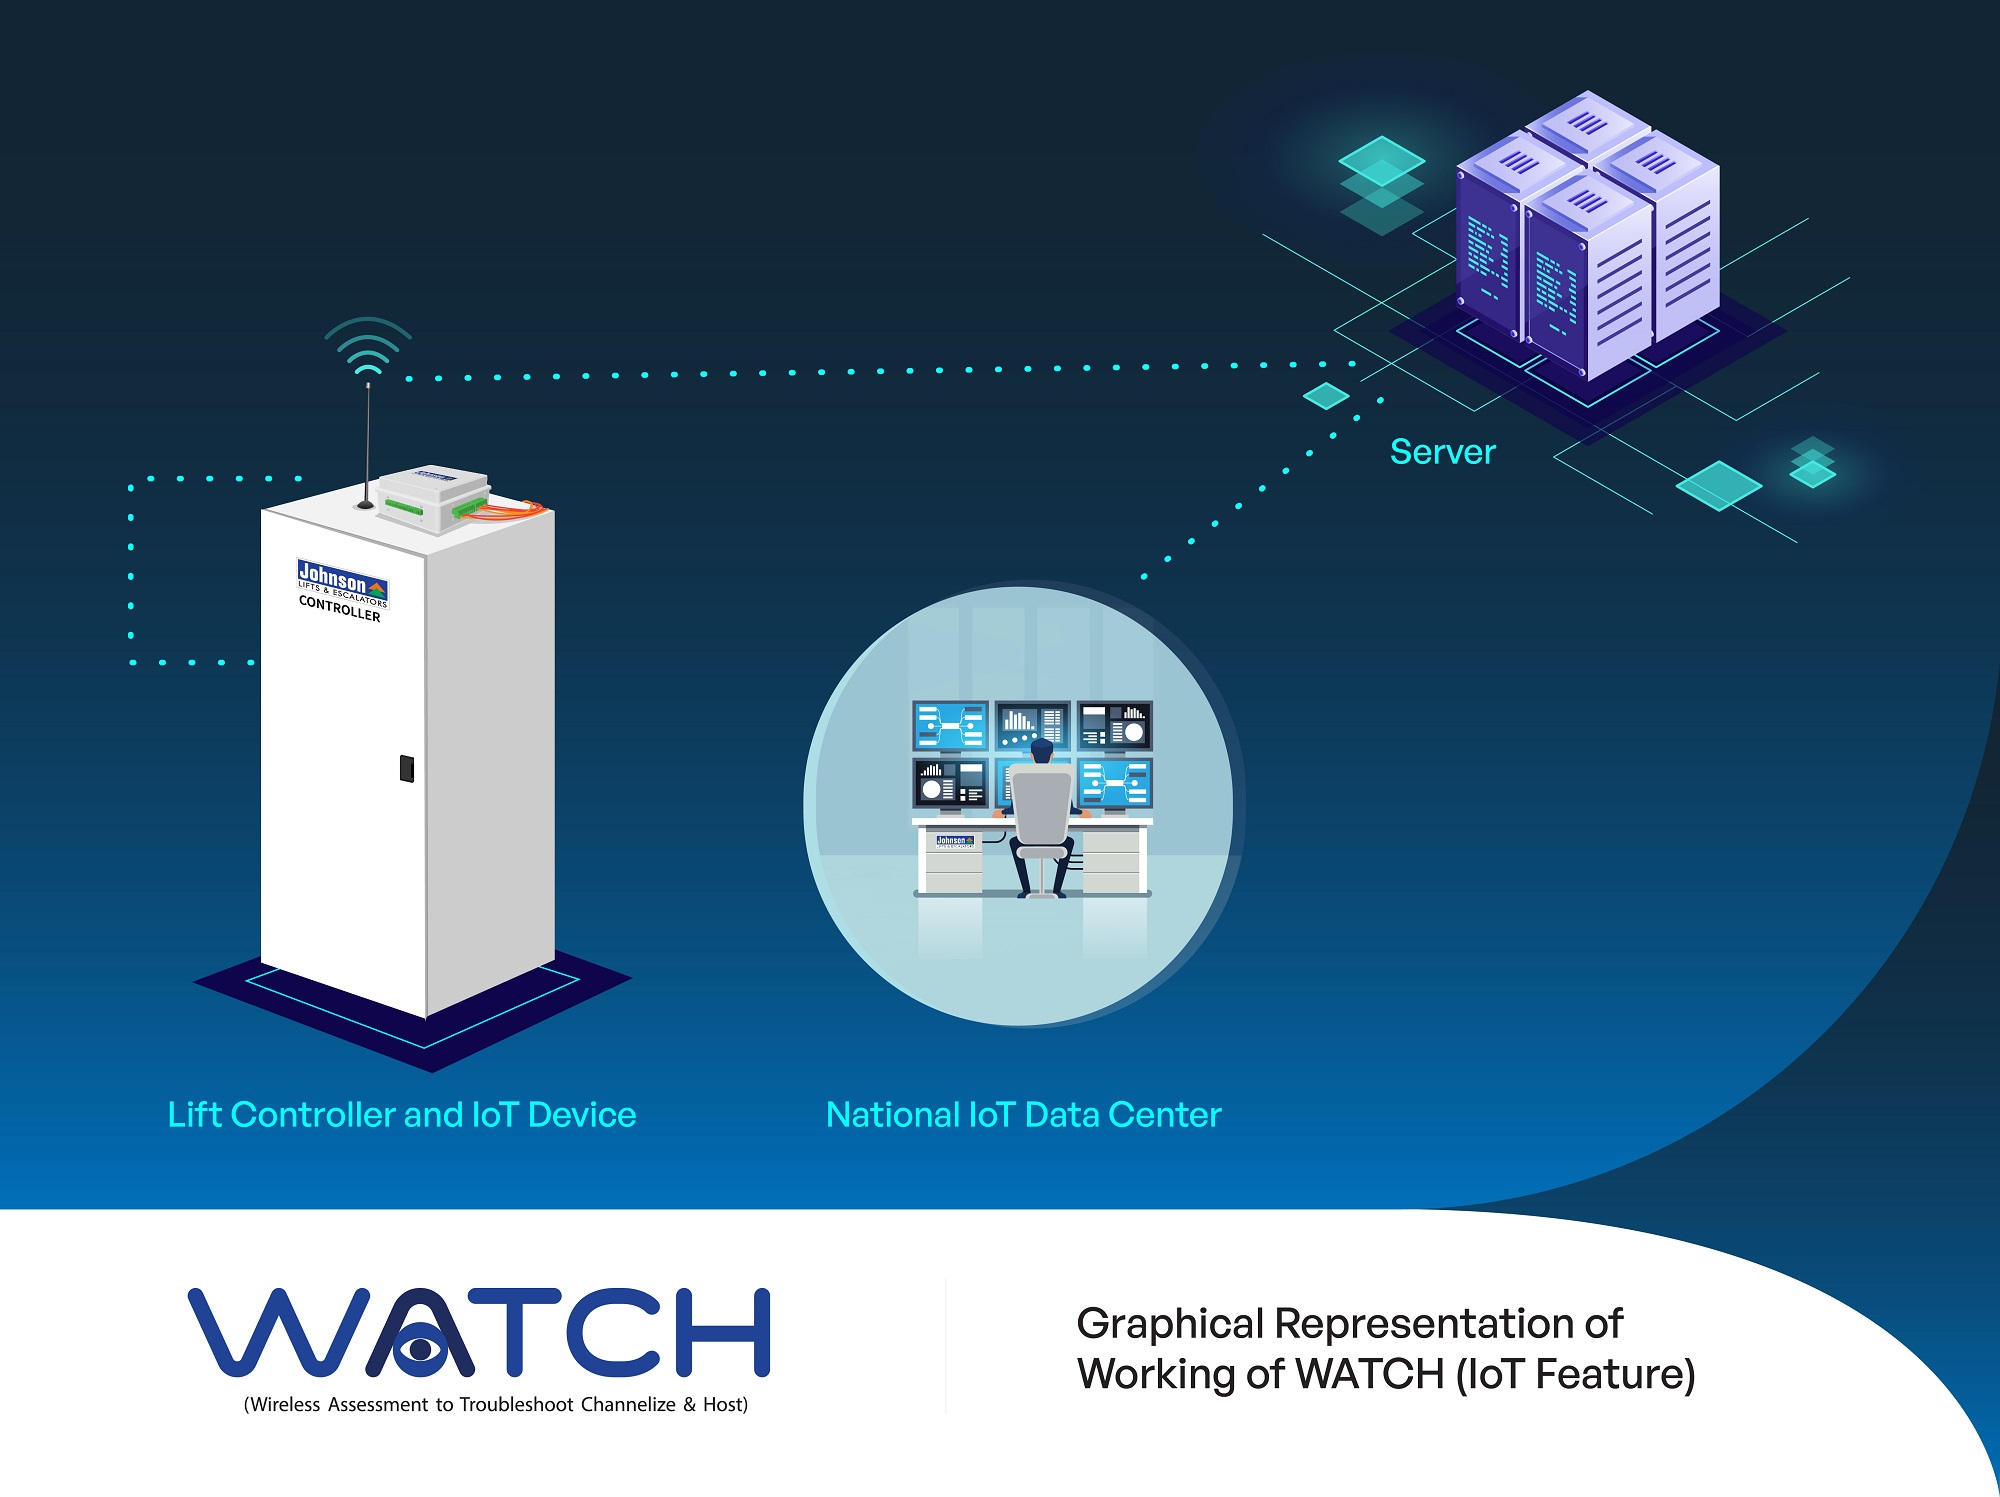 Johnson Lifts Launches IoT-Based Feature Named ‘WATCH’